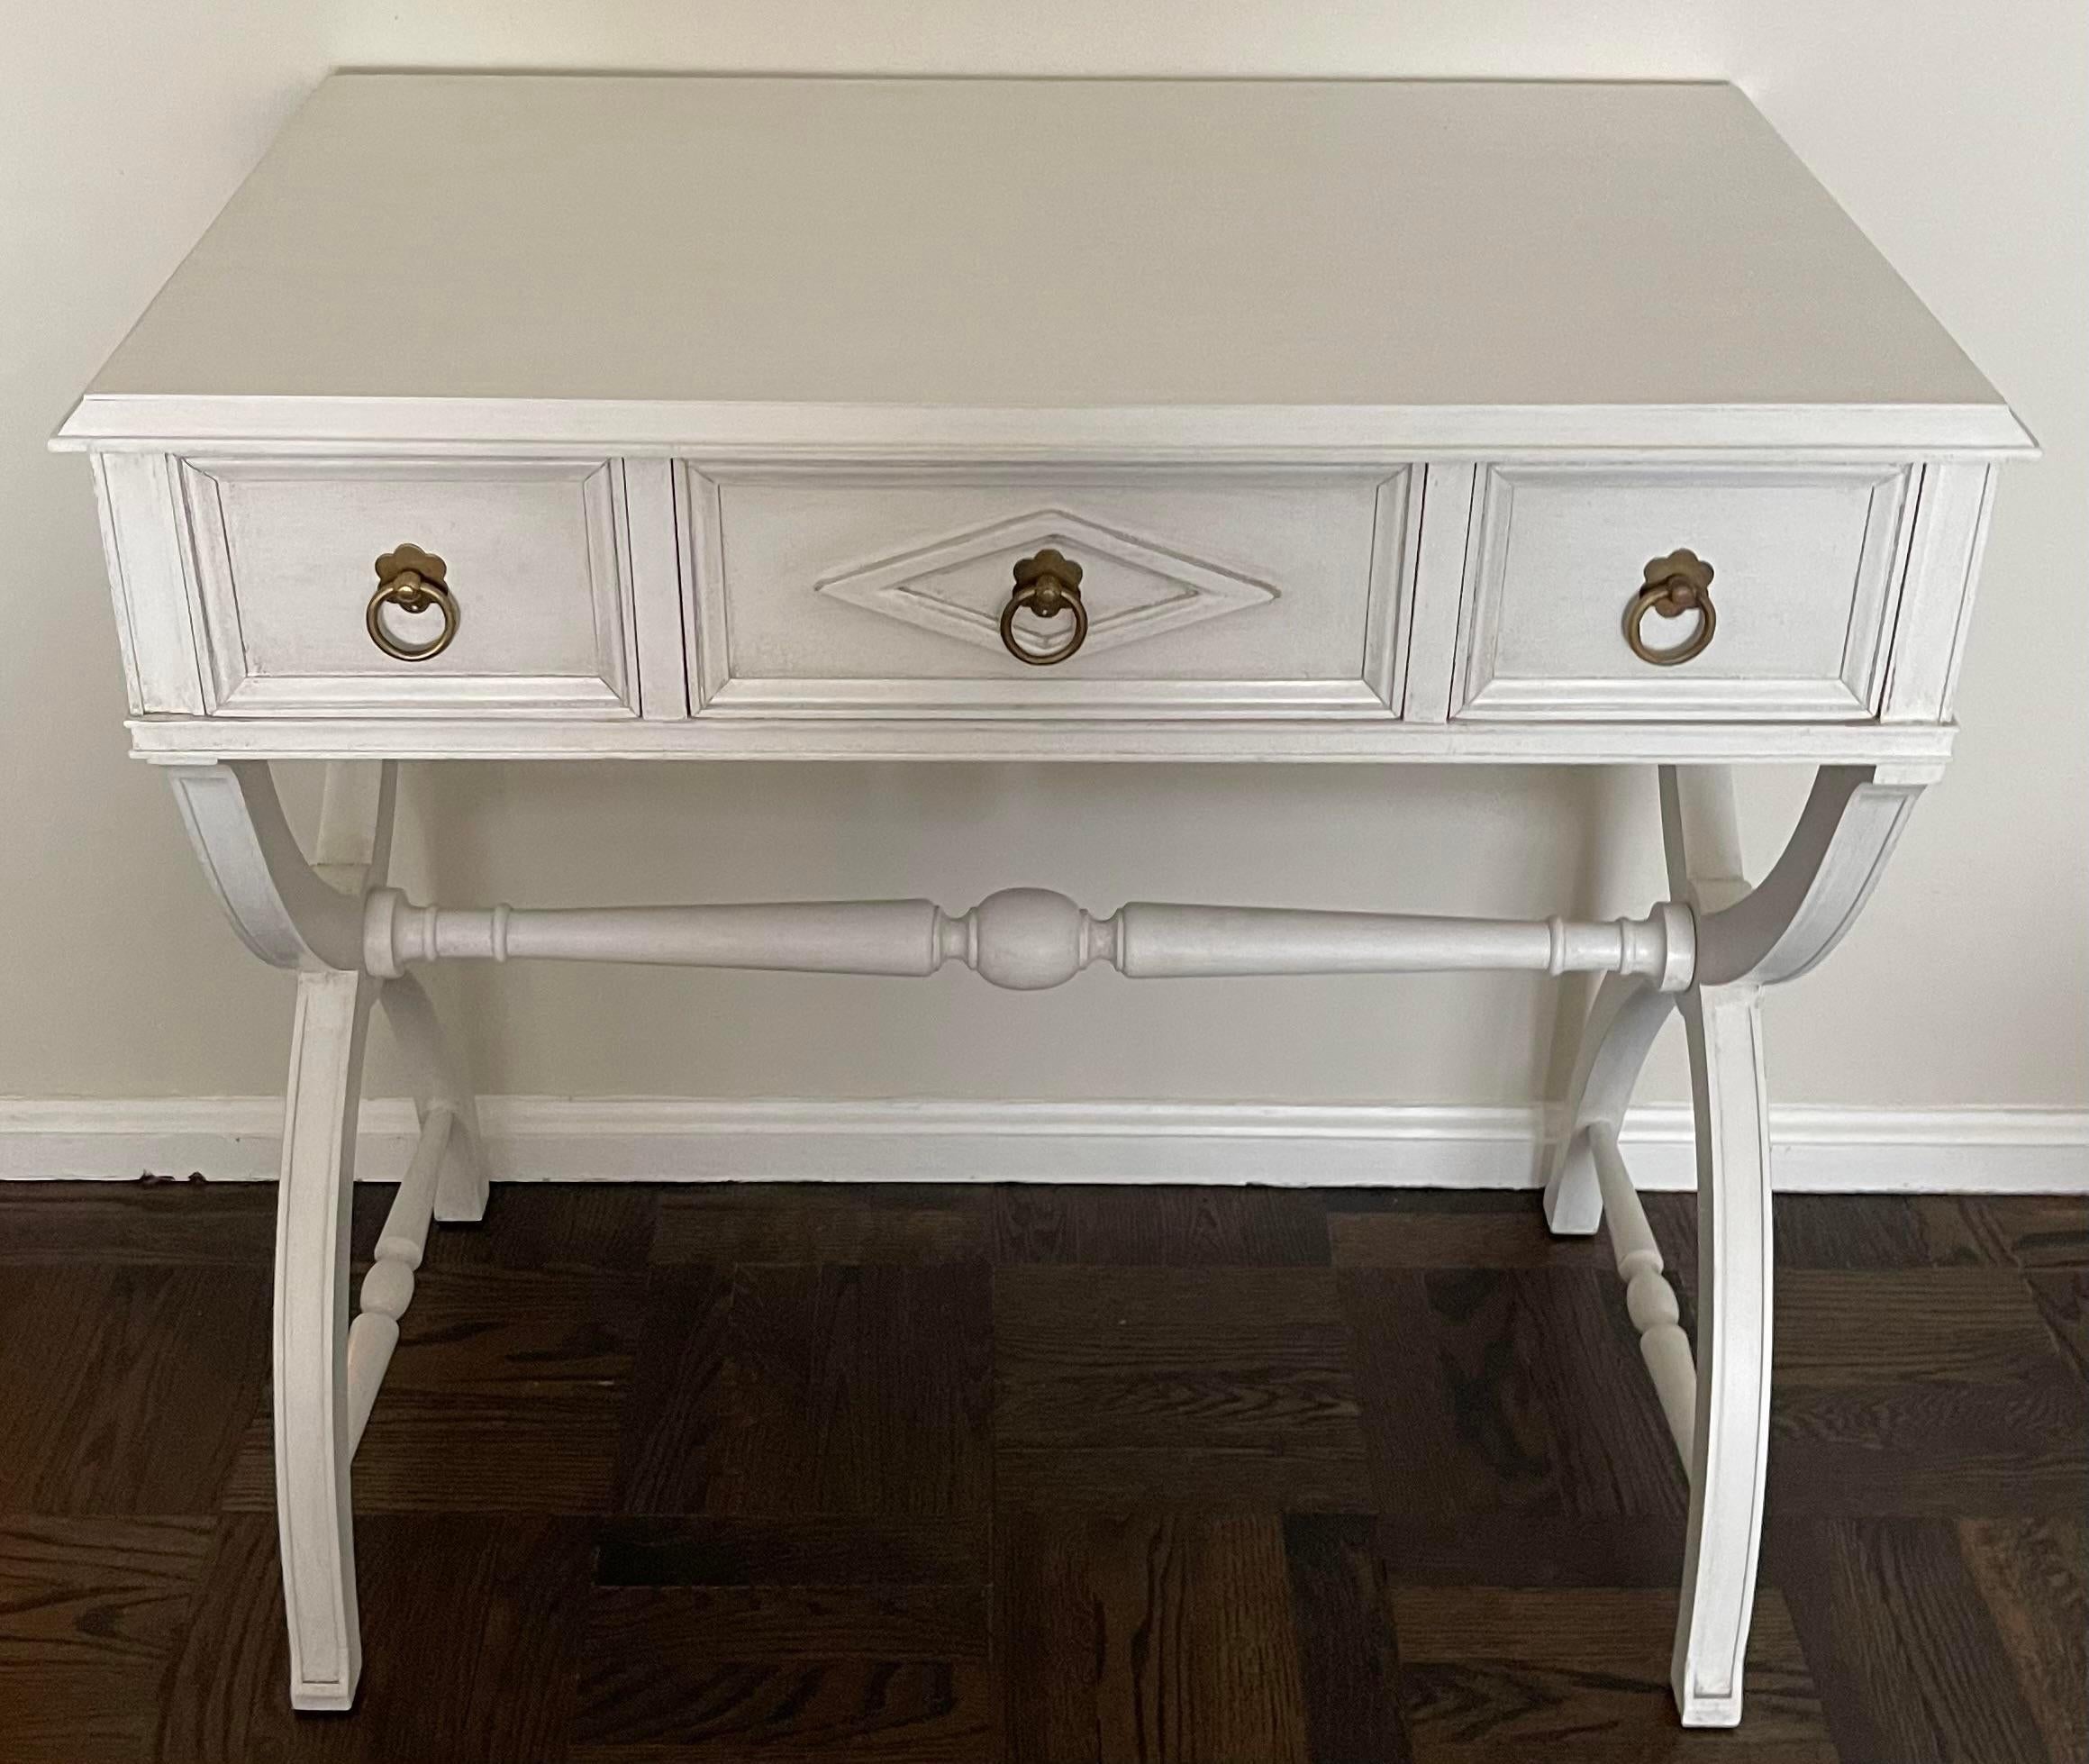 1930s neoclassical writing table or vanity table. Newly painted in an antique white finish. New vintage brass ring pulls have overall unpolished patina.
Clearance from floor to bottom of drawers is 24” tall.